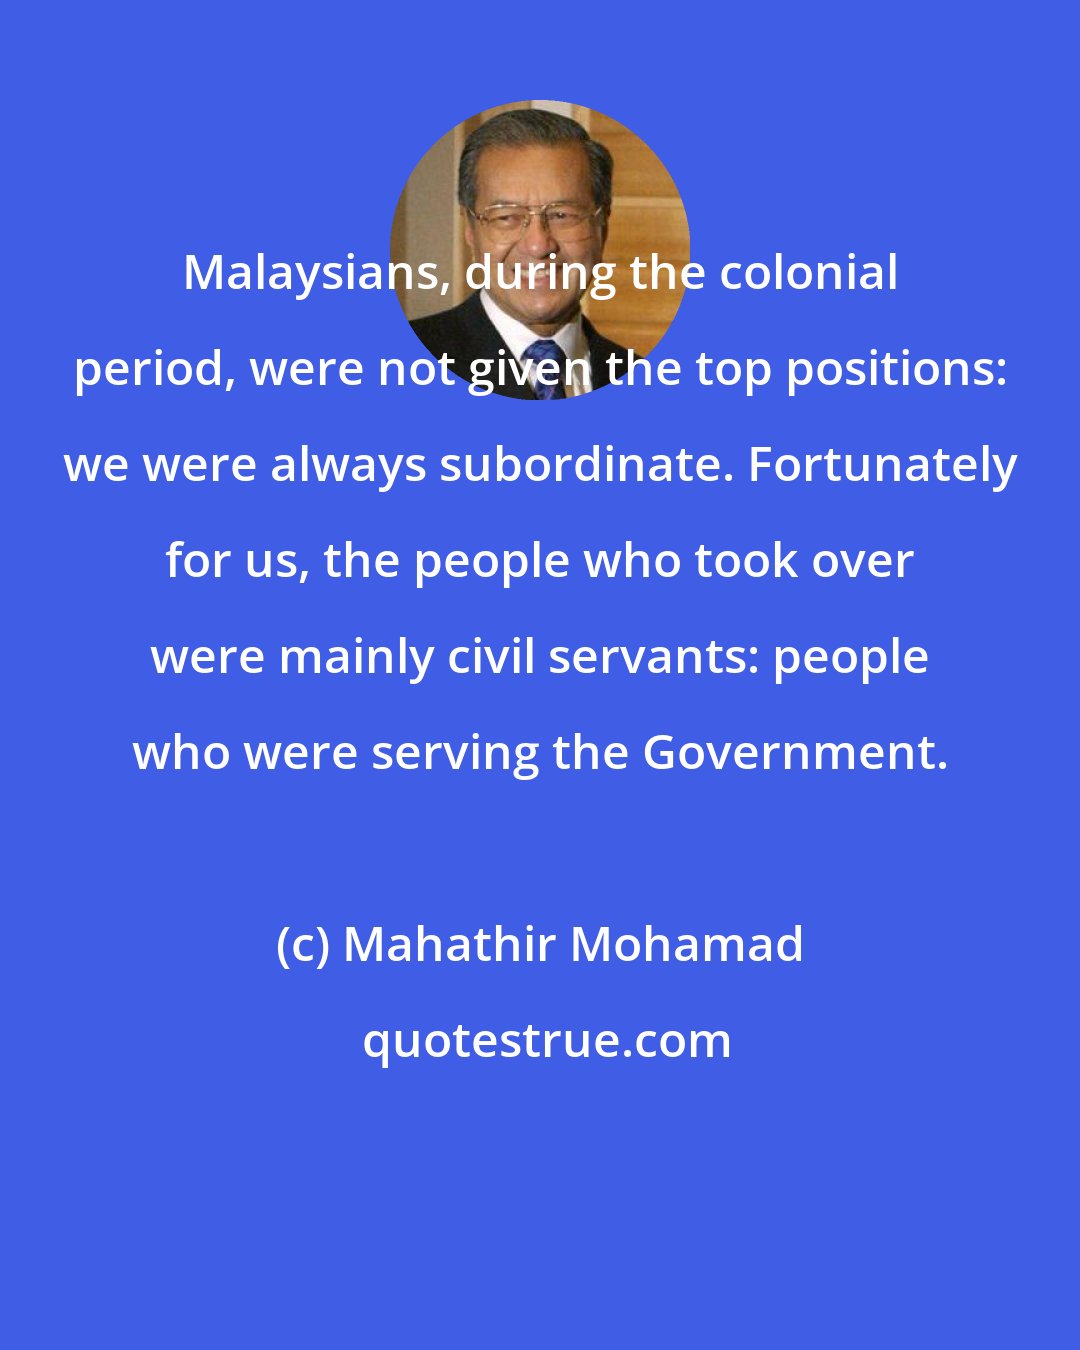 Mahathir Mohamad: Malaysians, during the colonial period, were not given the top positions: we were always subordinate. Fortunately for us, the people who took over were mainly civil servants: people who were serving the Government.